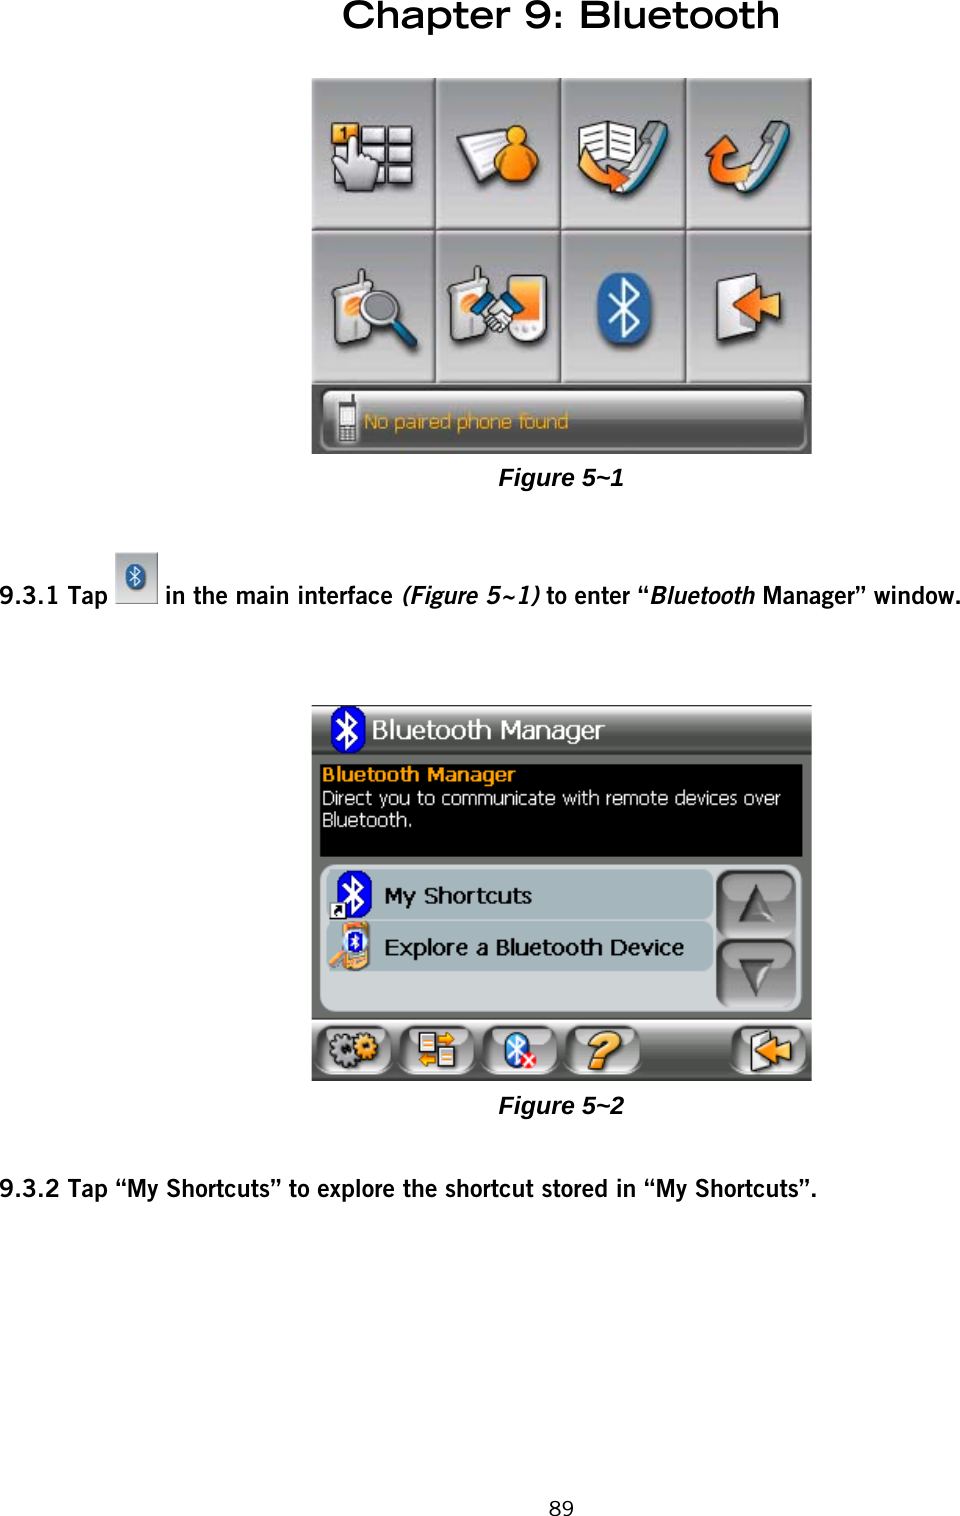 Chapter 9: Bluetooth89Figure 5~19.3.1 Tap   in the main interface (Figure 5~1) to enter “Bluetooth Manager” window.Figure 5~29.3.2 Tap “My Shortcuts” to explore the shortcut stored in “My Shortcuts”.